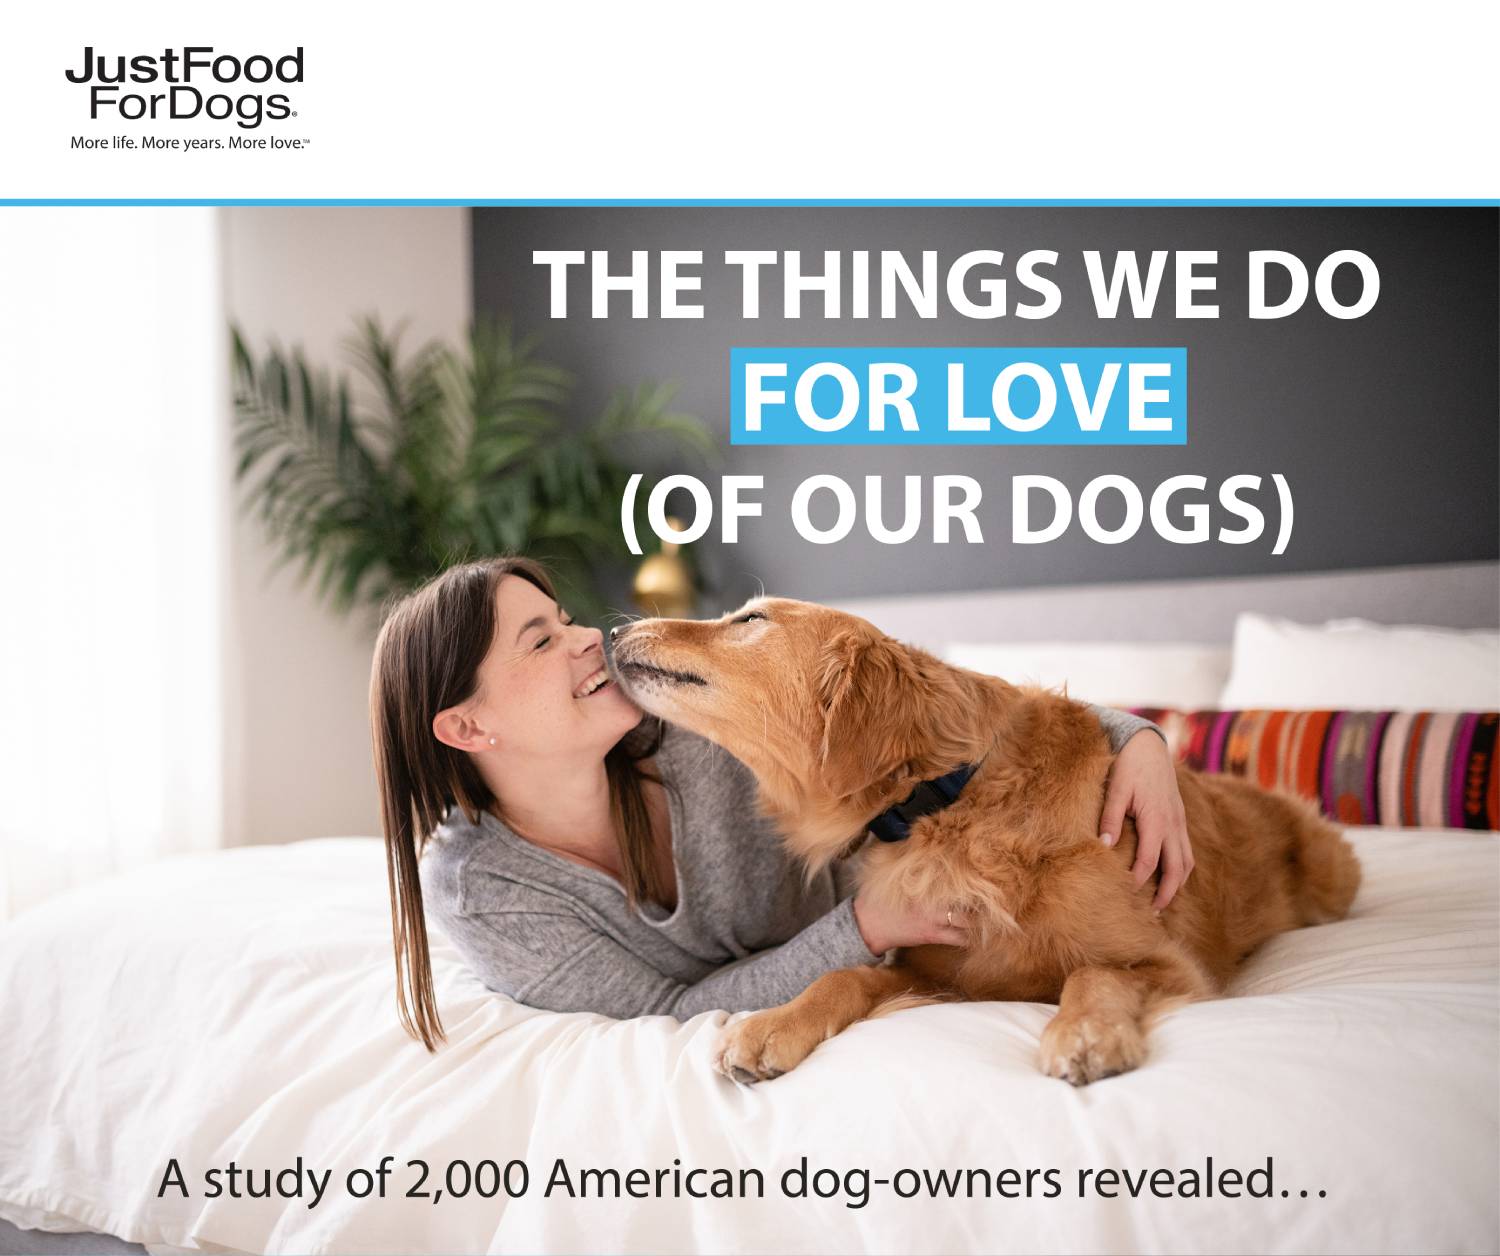 JustFoodForDogs Pet Love